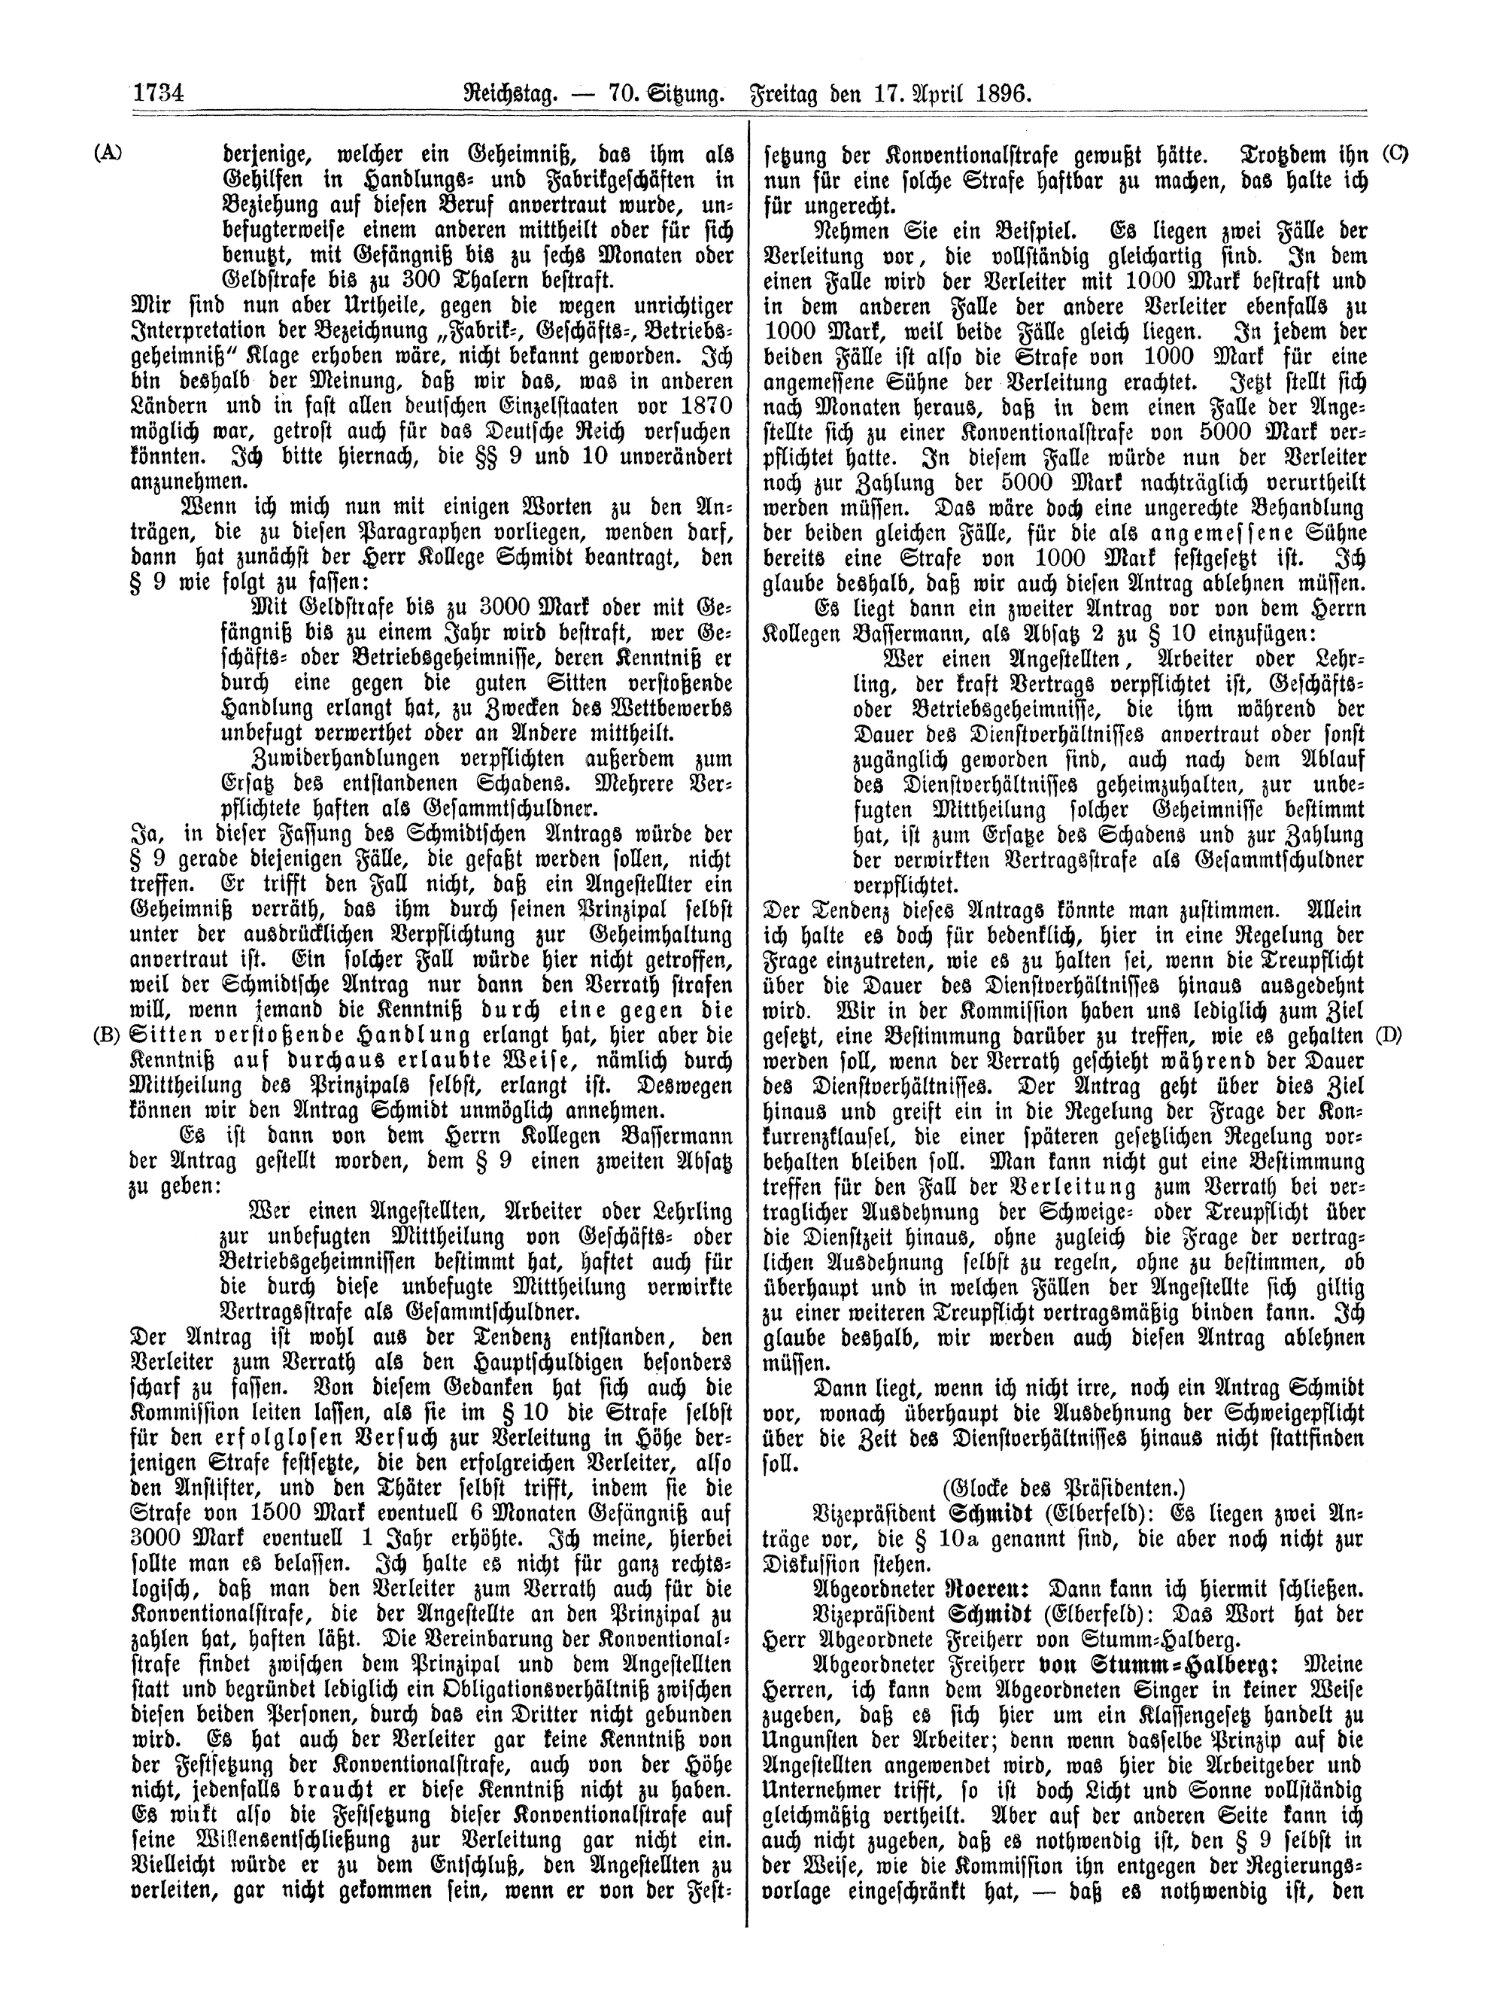 Scan of page 1734